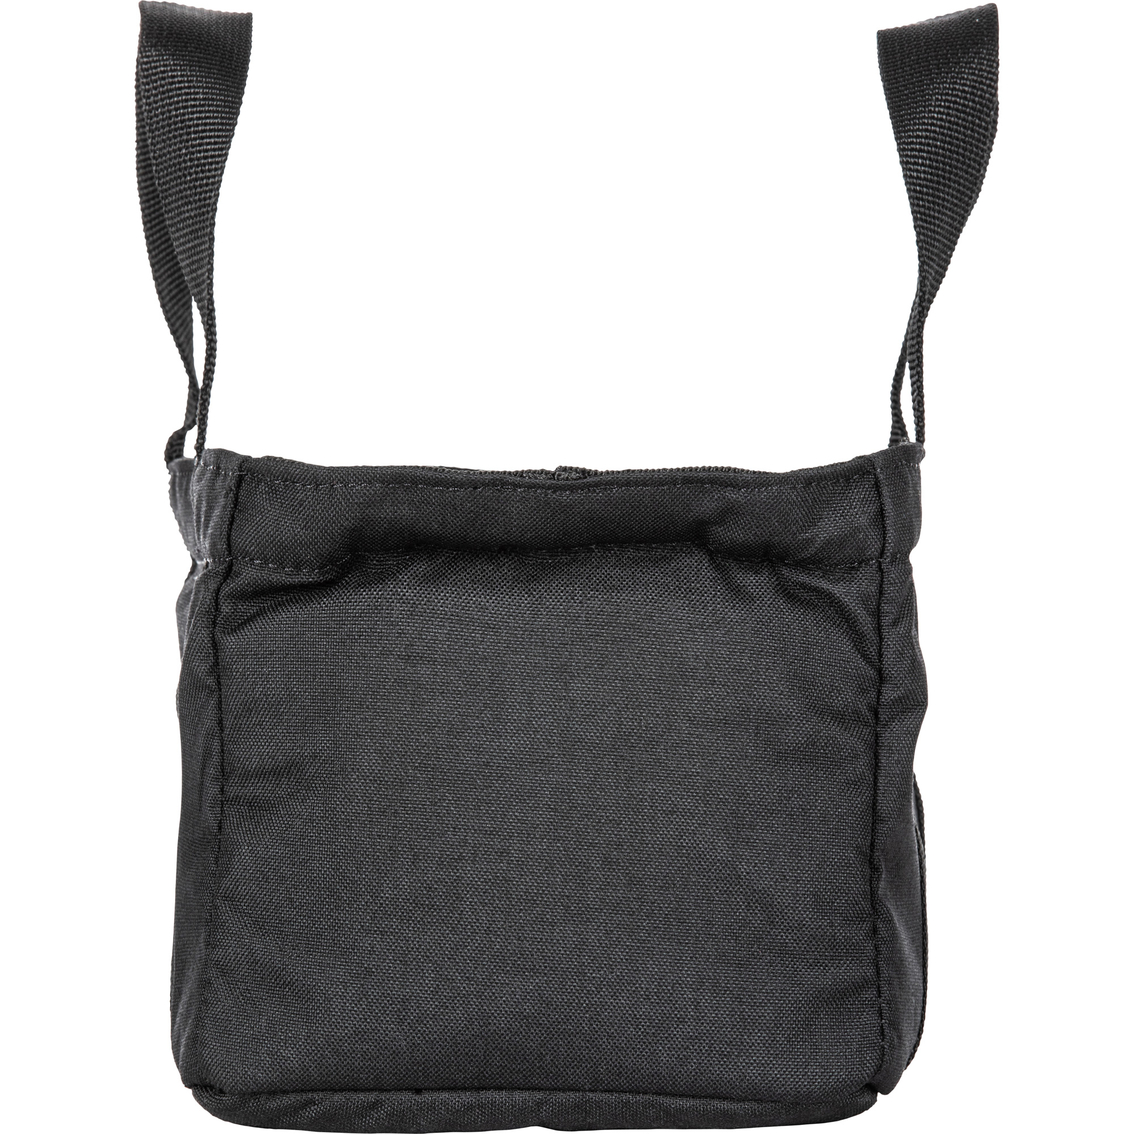 5.11 Range Master Padded Pouch - Image 6 of 6